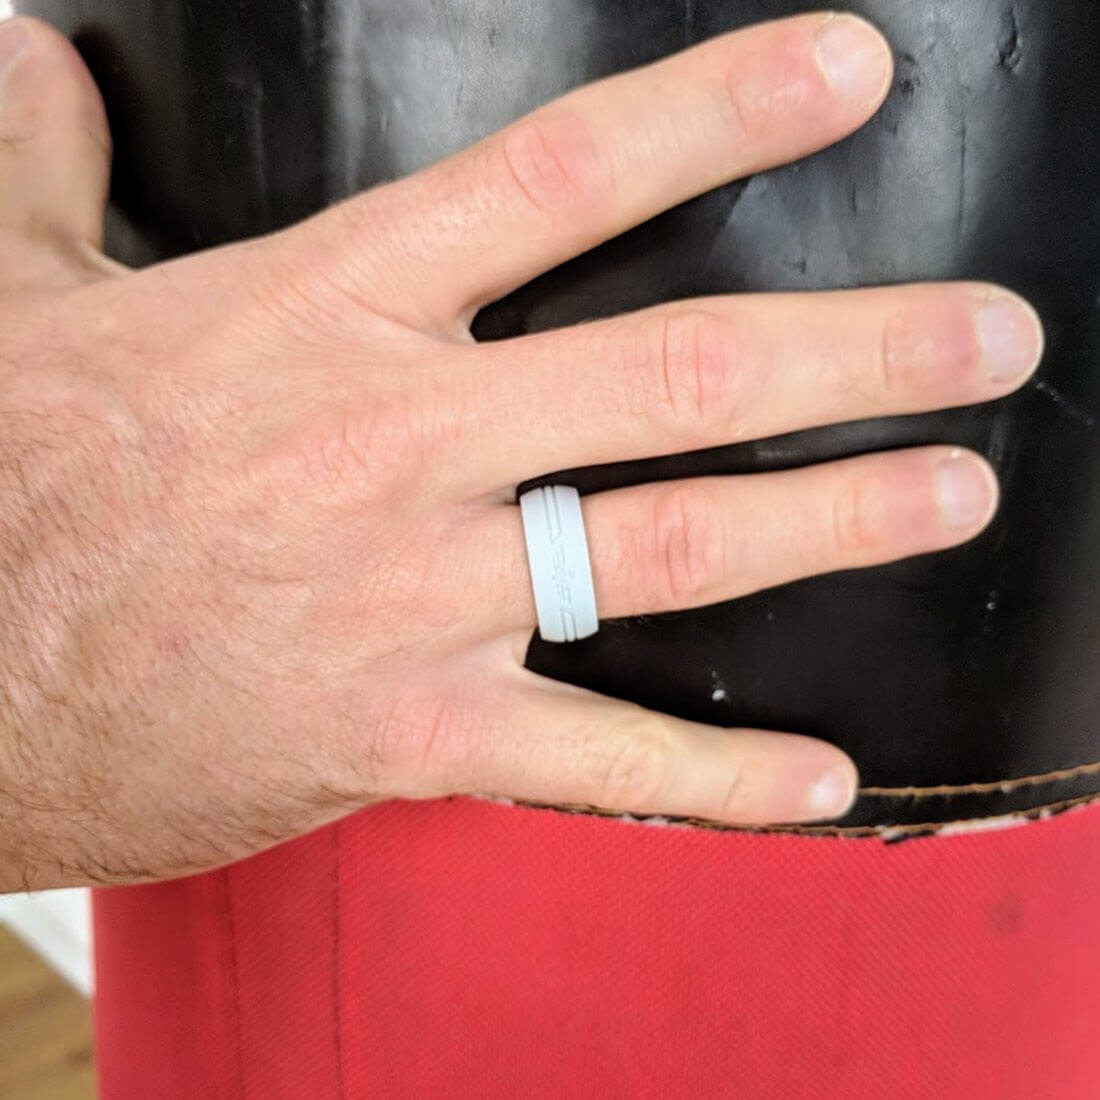 How Tight Should Silicone Rings Be?, Enso Rings